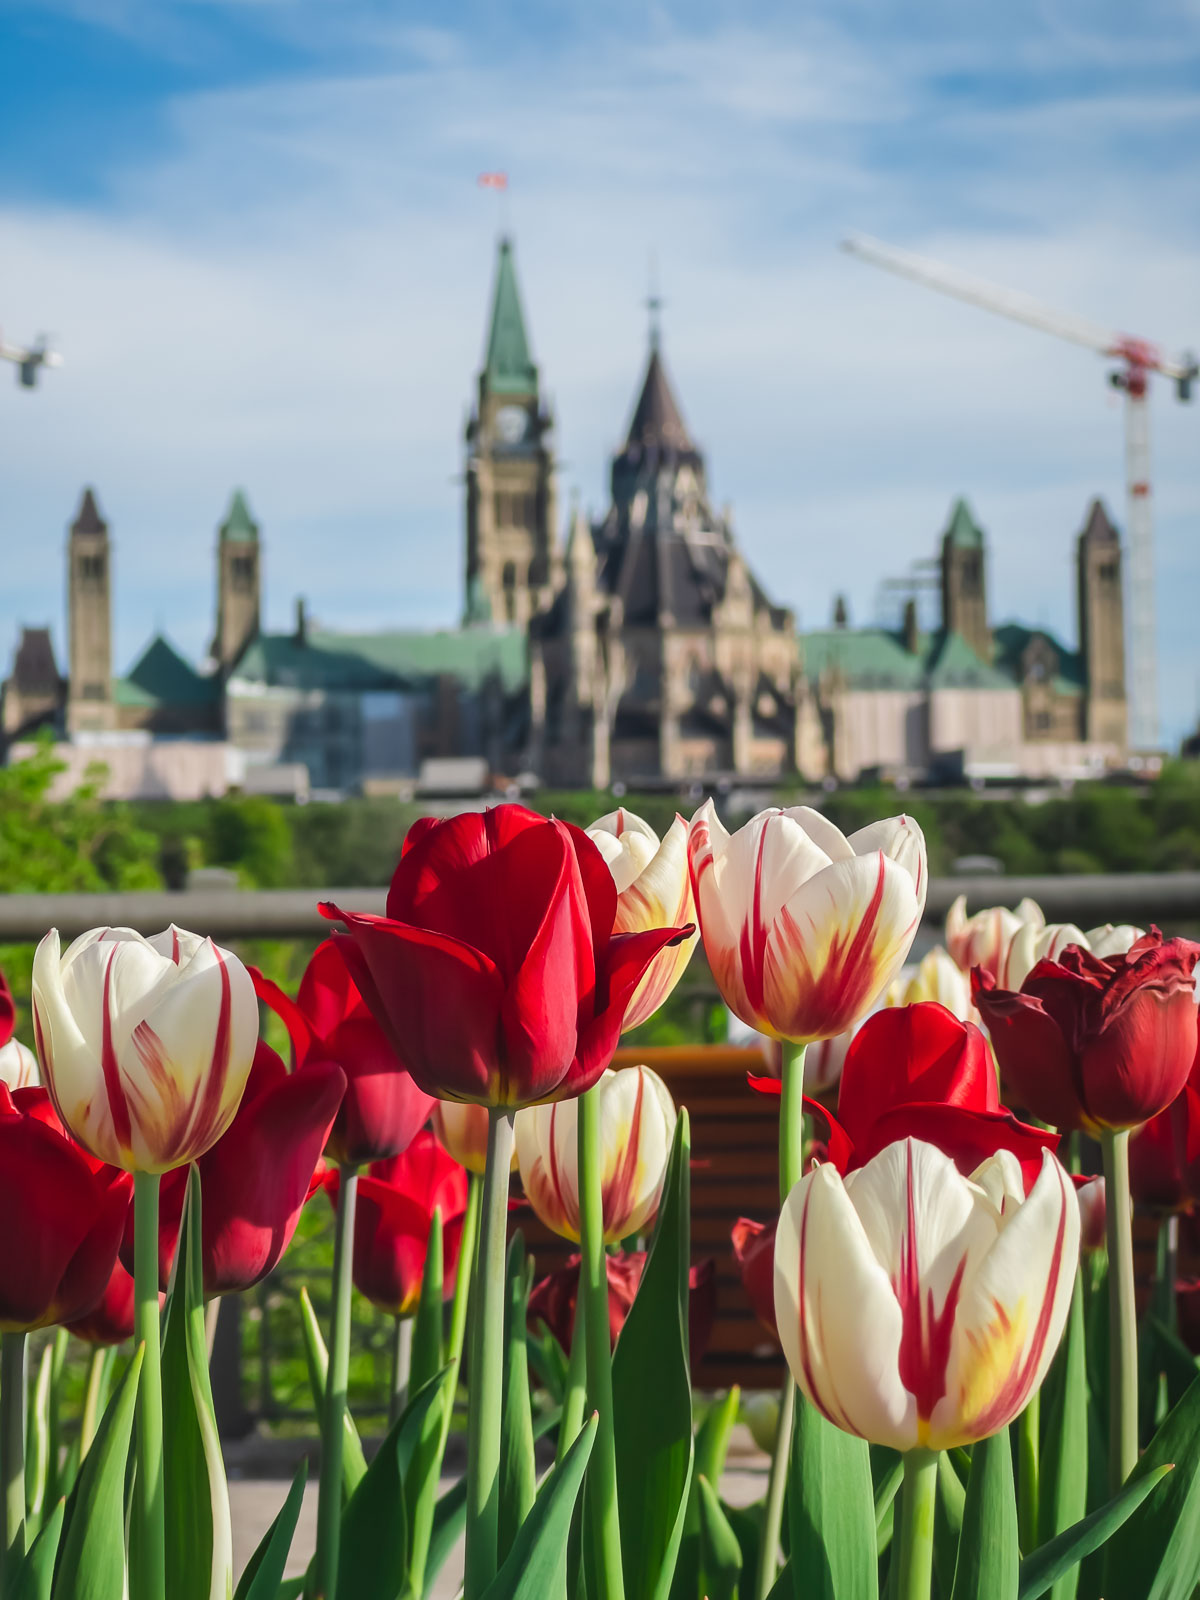 How to Visit the Ottawa Tulip Festival The Best and Biggest